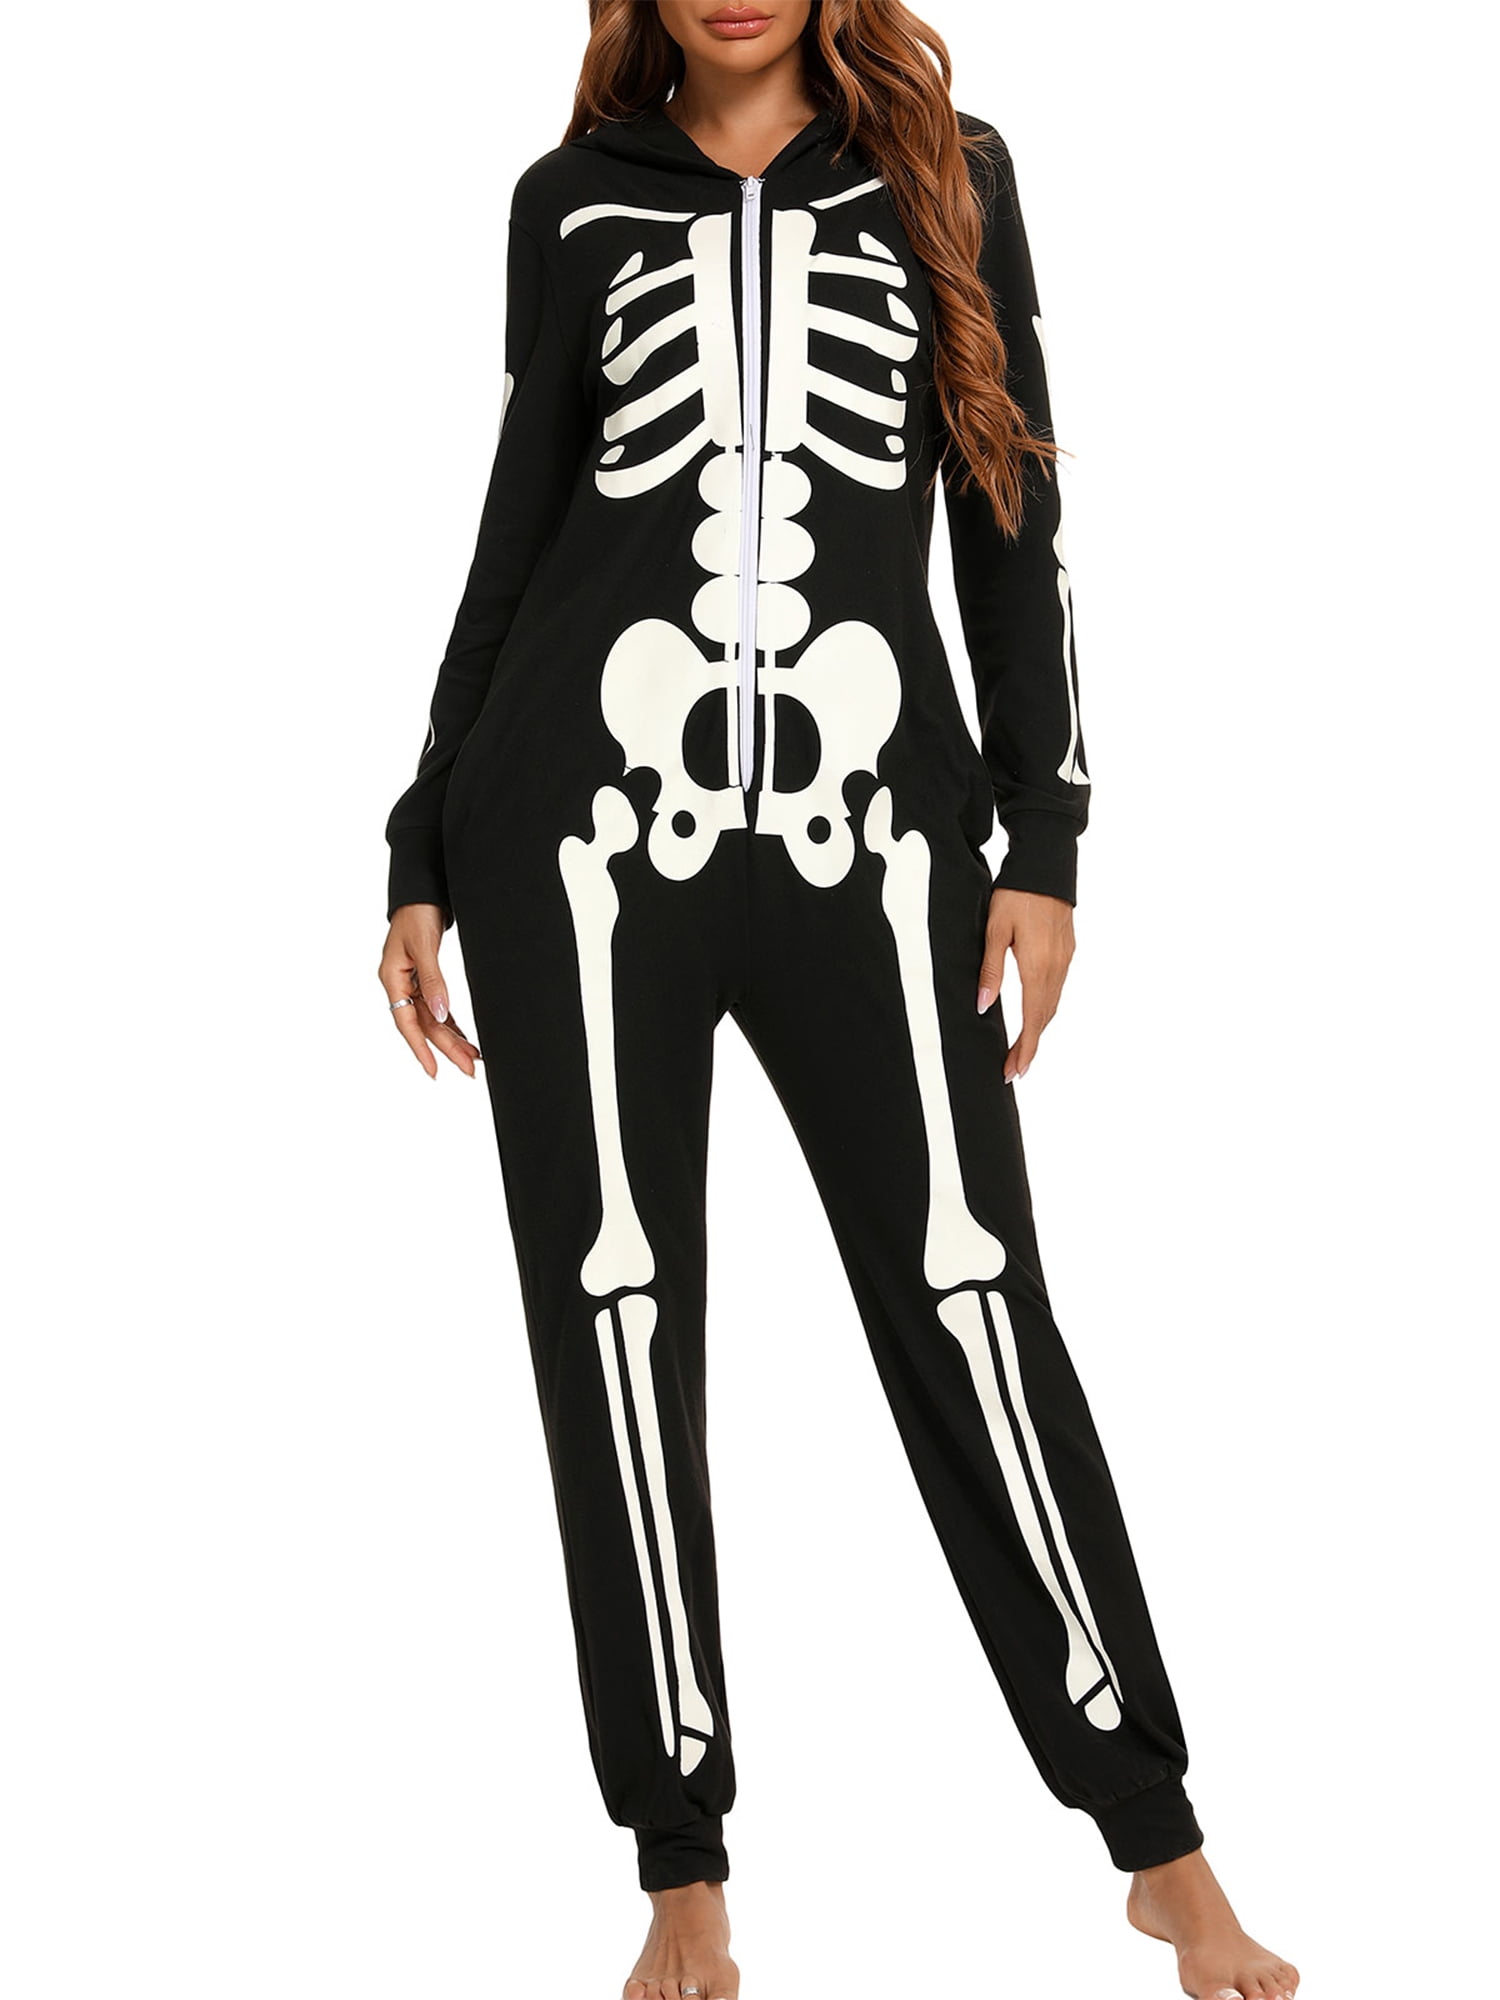 SUNSIOM Matching Family Costumes Halloween Glow in The One-Piece Jumpsuit Hoodie Onesies for Adult Kids - Walmart.com